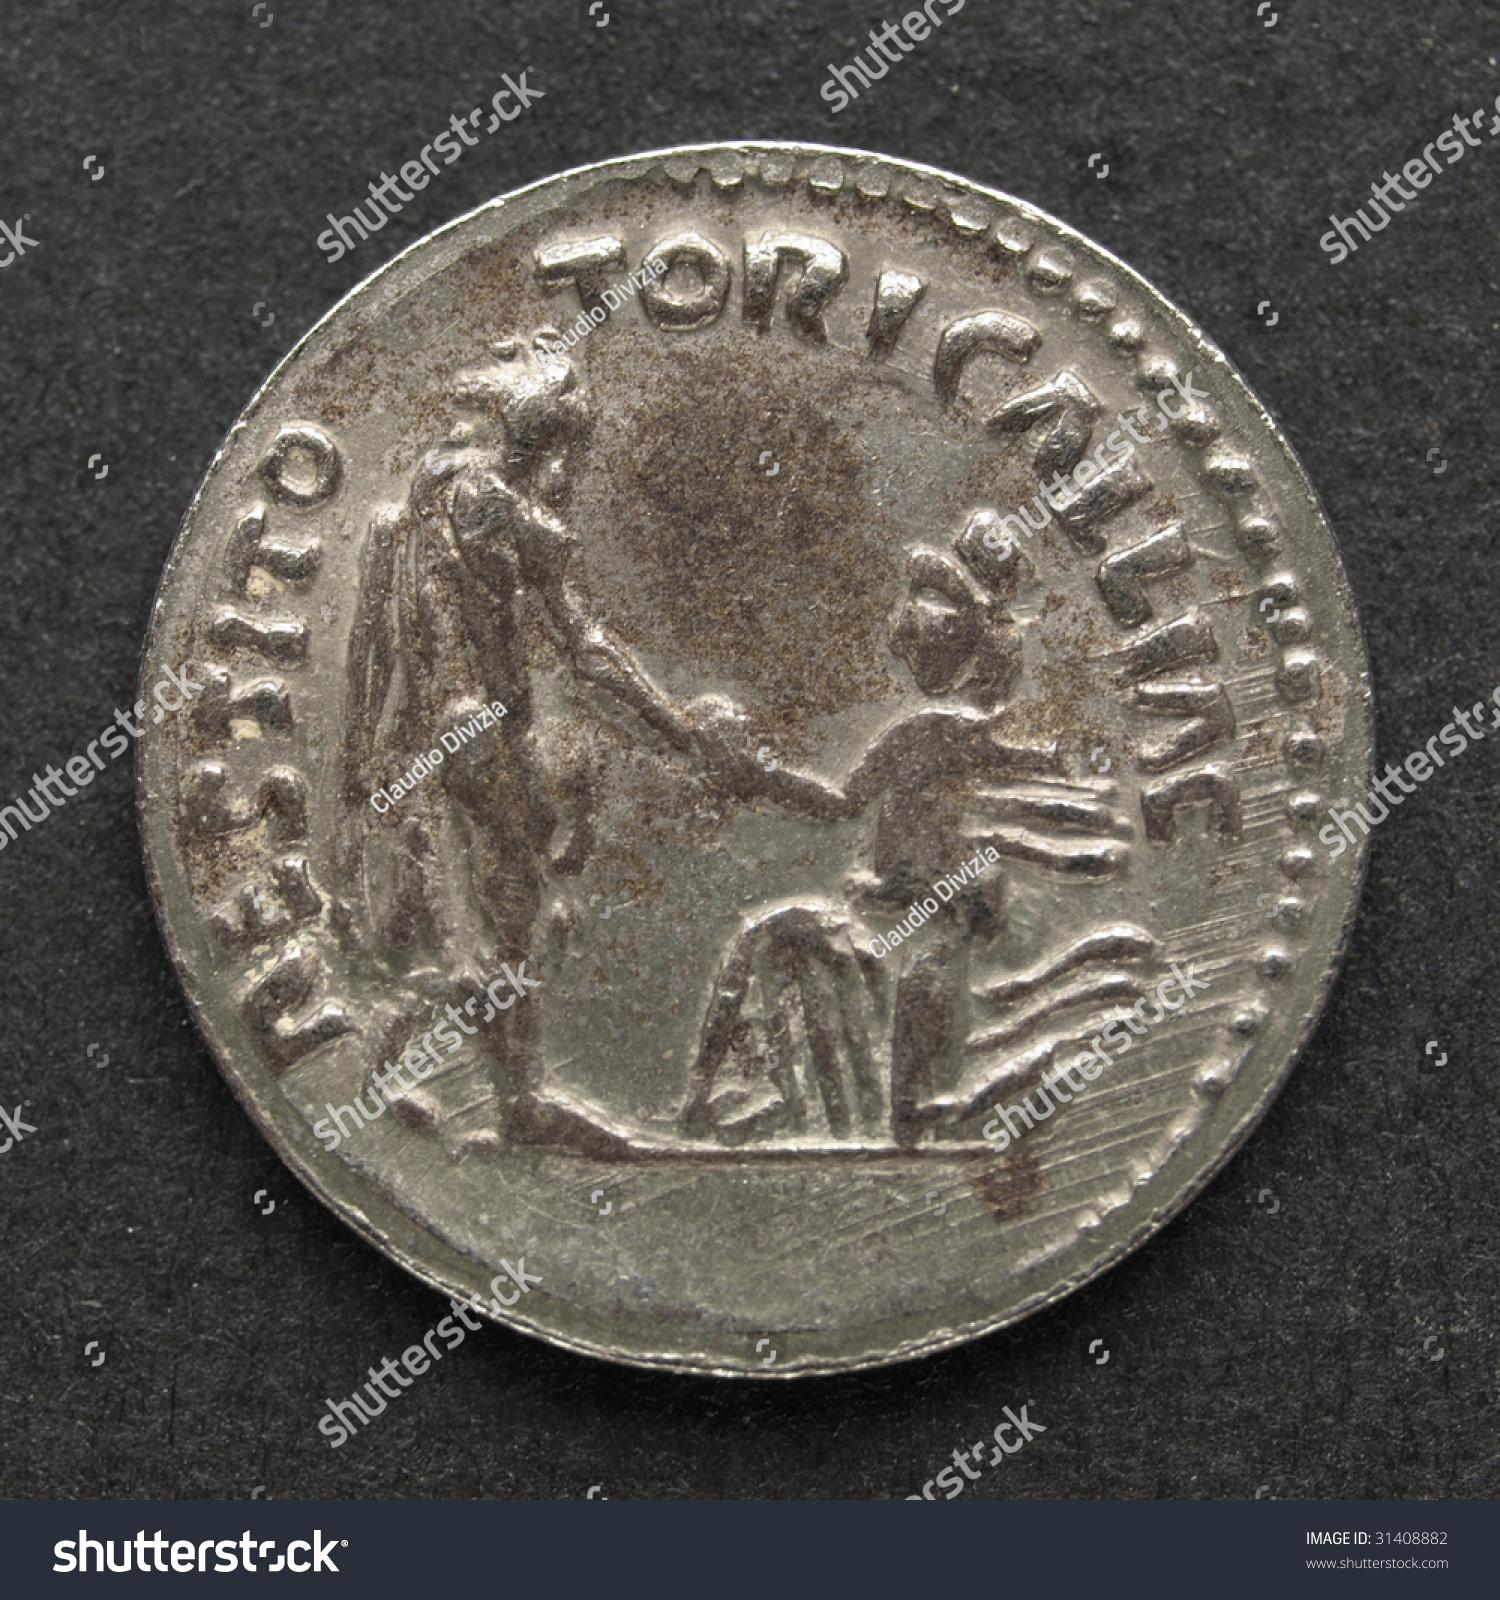 Ancient Roman coins on a black background #31408882